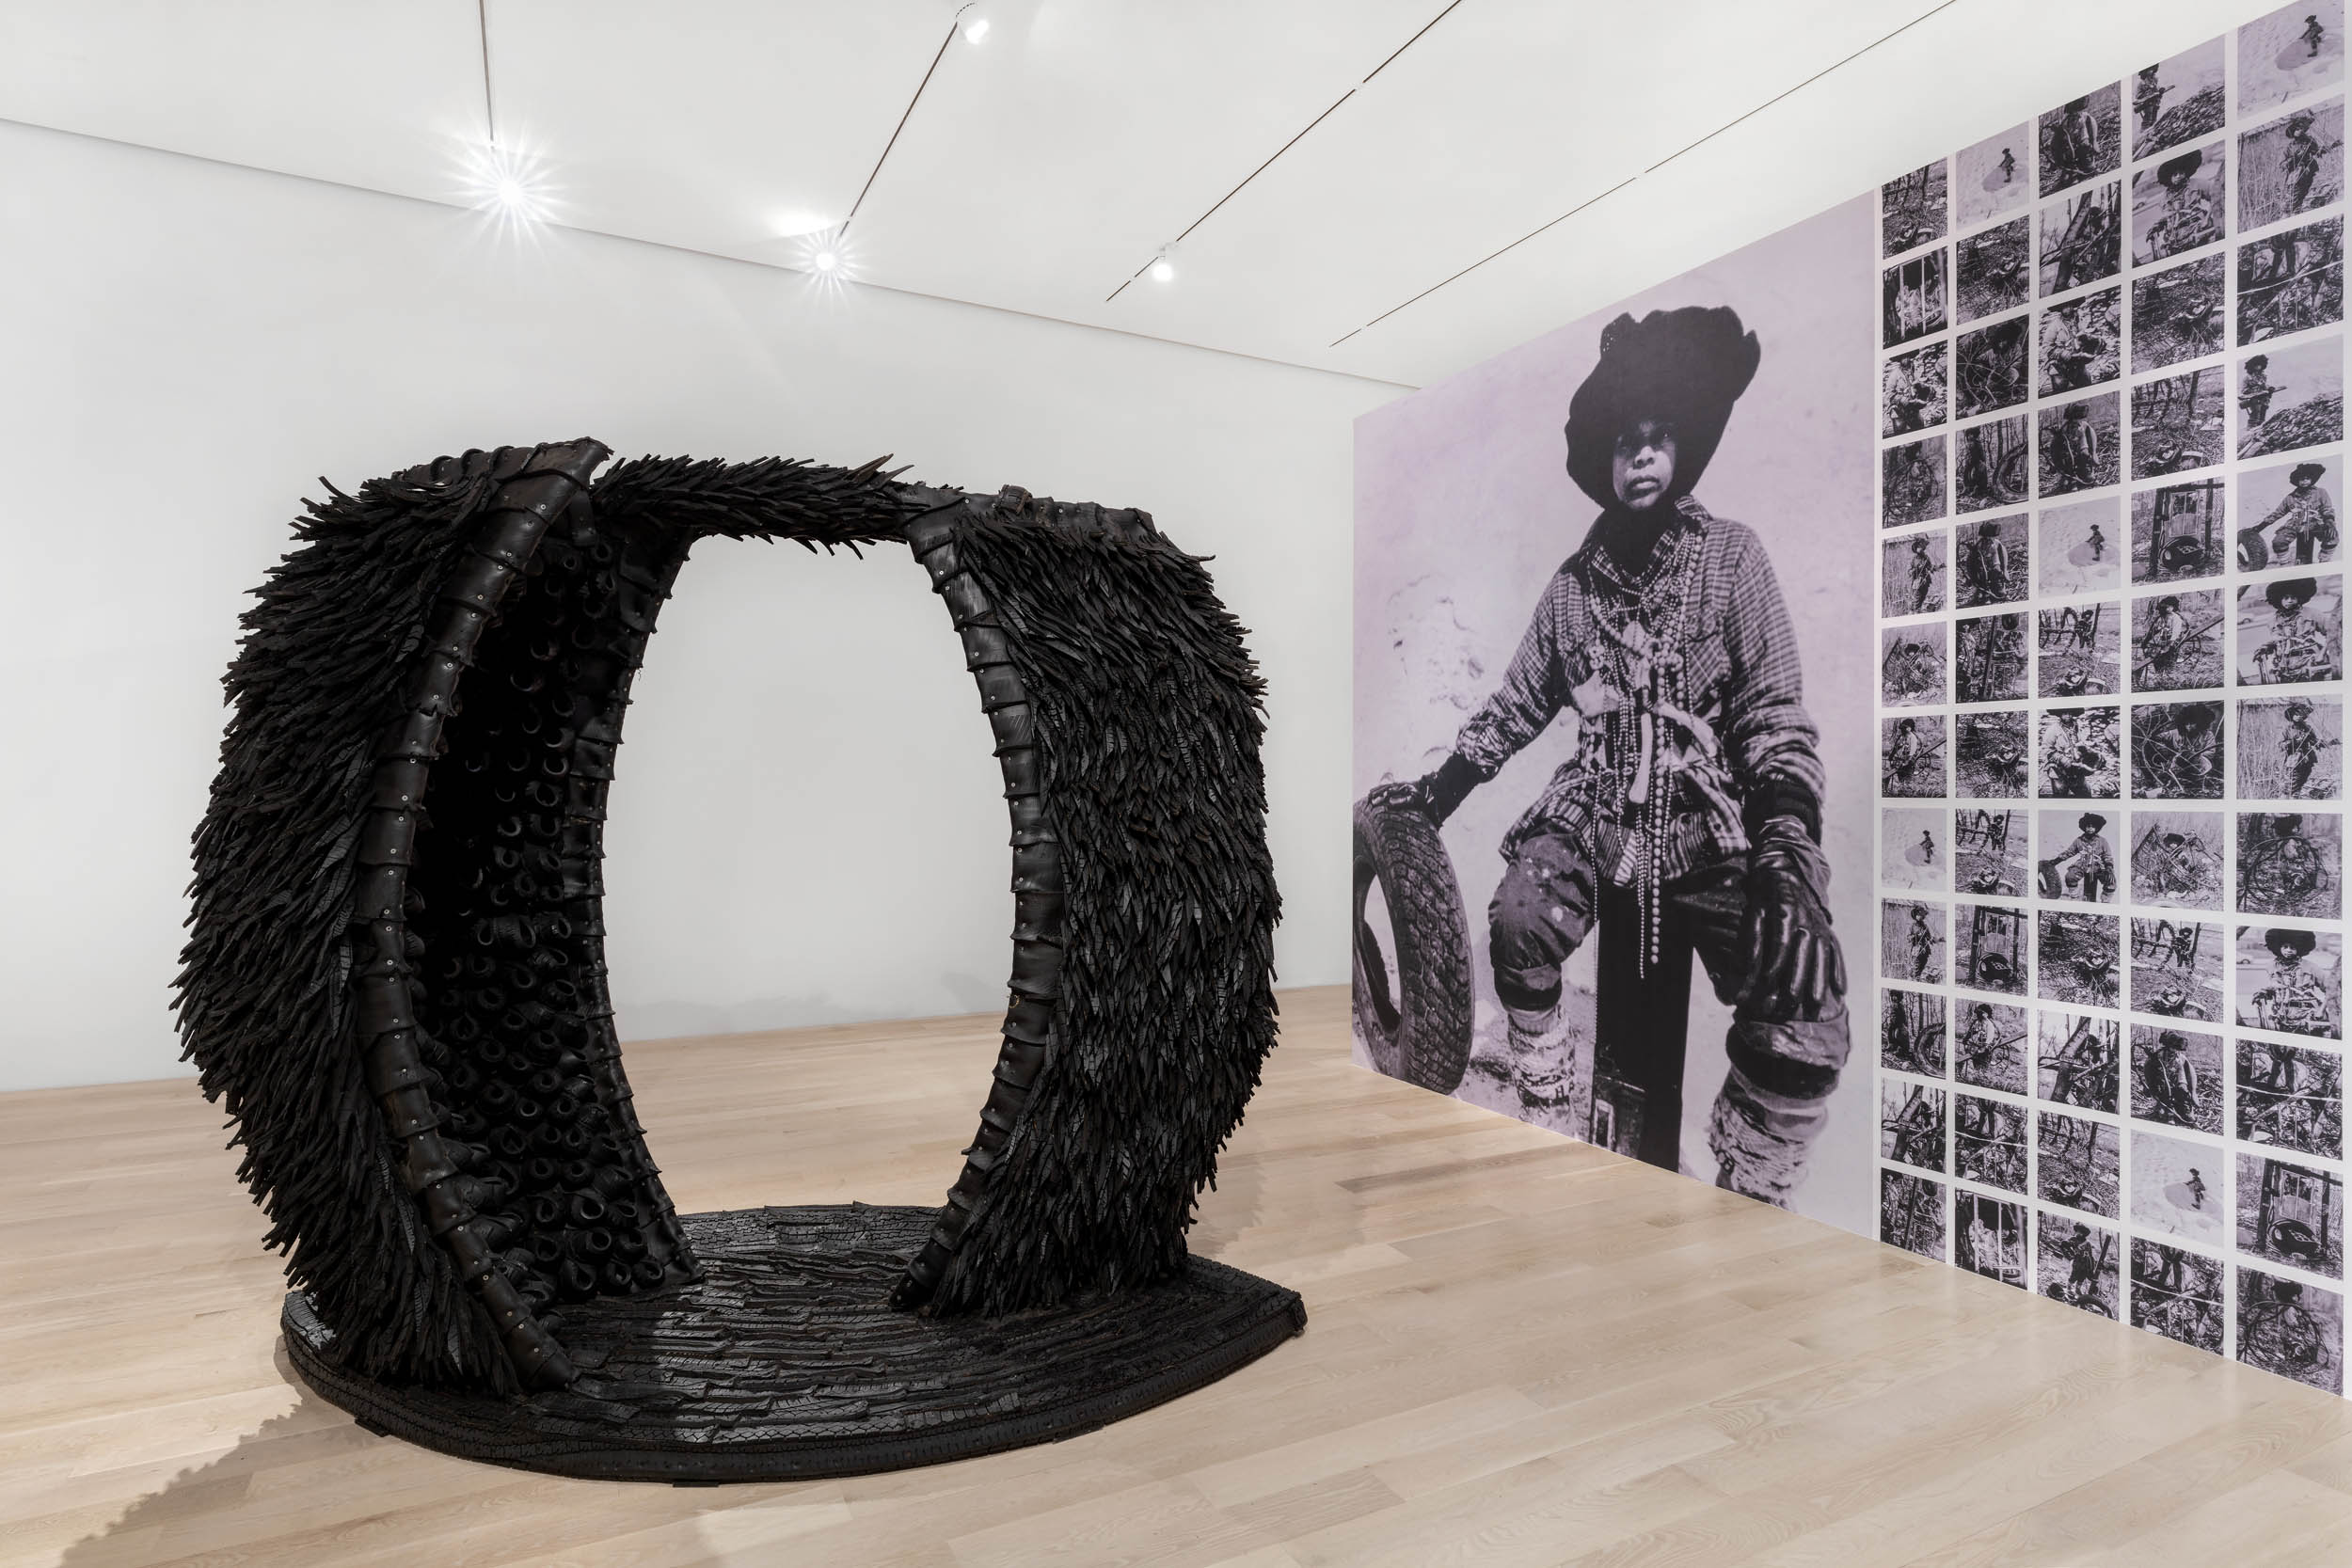 In a modern art gallery with light wood floors, a large circular sculpture of feathered rubber material sits in the middle of the room. On an adjacent wall, one large black-and-white photograph shows a dark-skinned woman in industrial dress sitting on a stool, her hand resting on a tire. Next to this photograph is an entire wall of many smaller photos featuring the same woman.